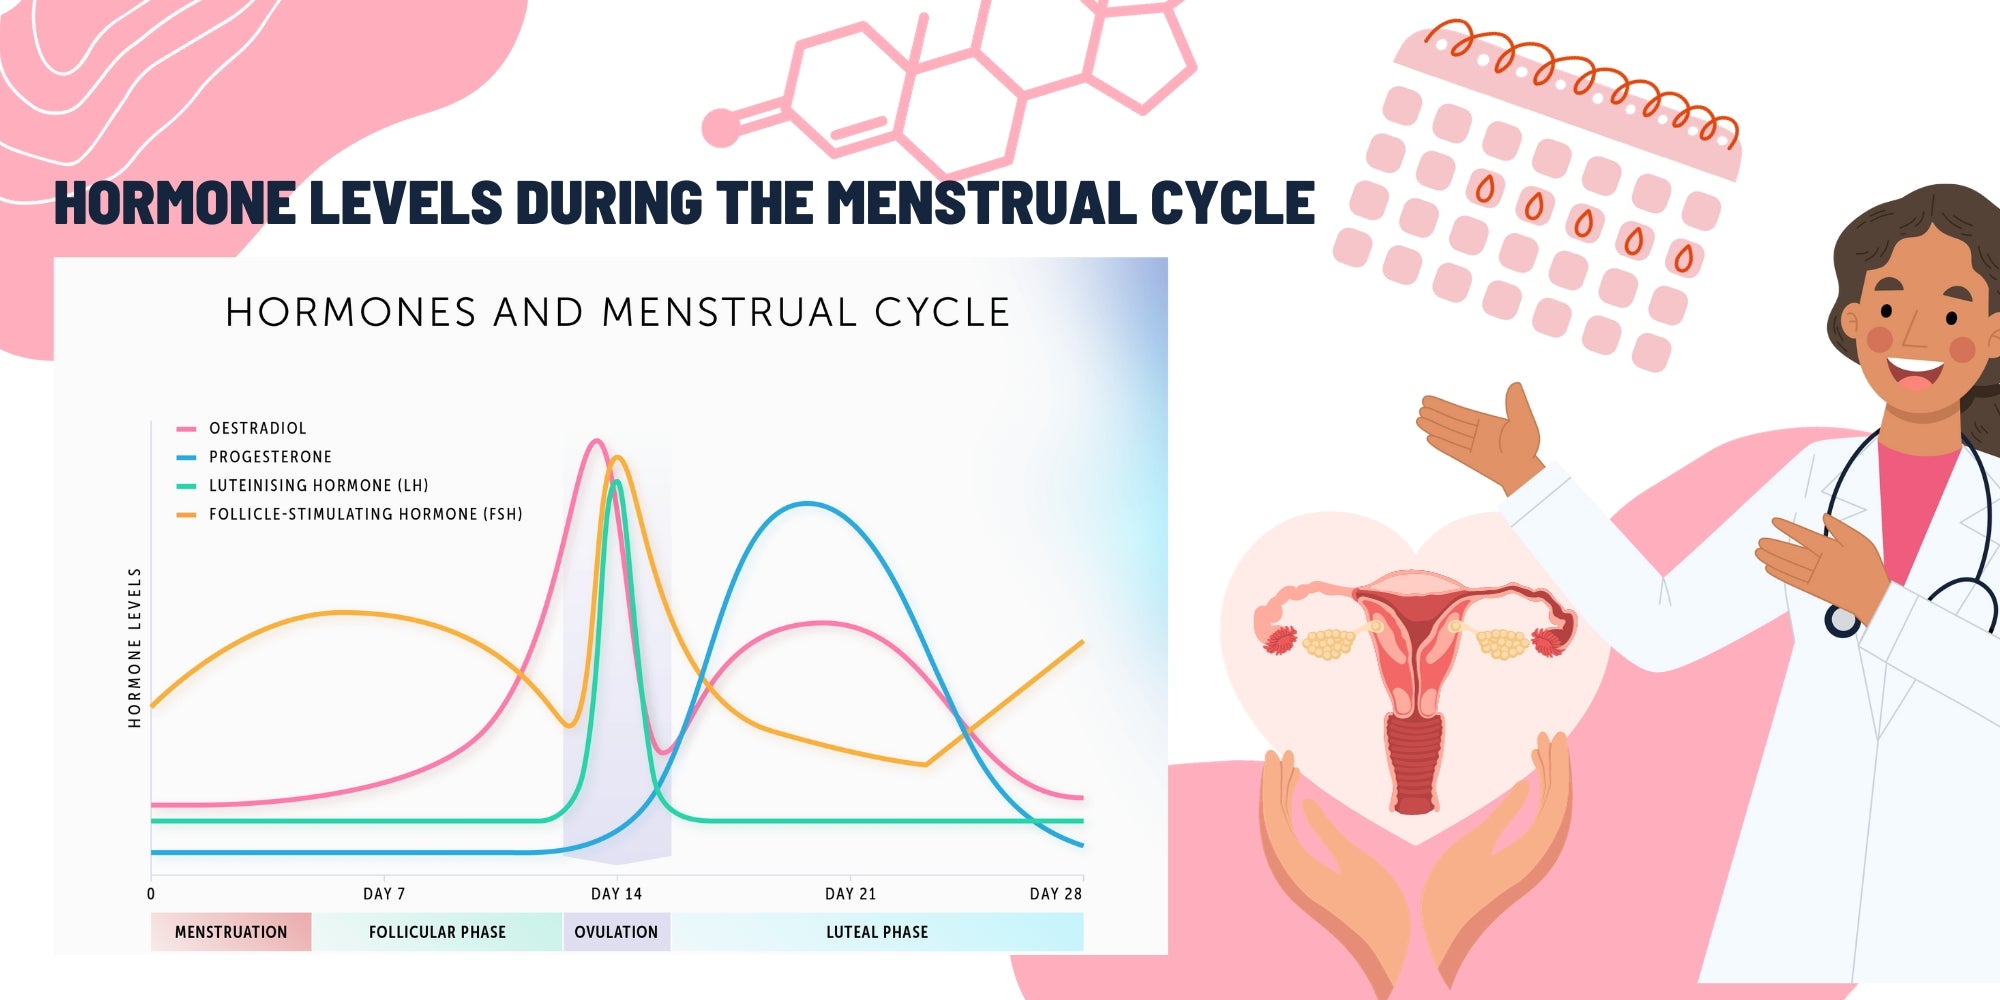 Hormone levels in the menstrual cycle